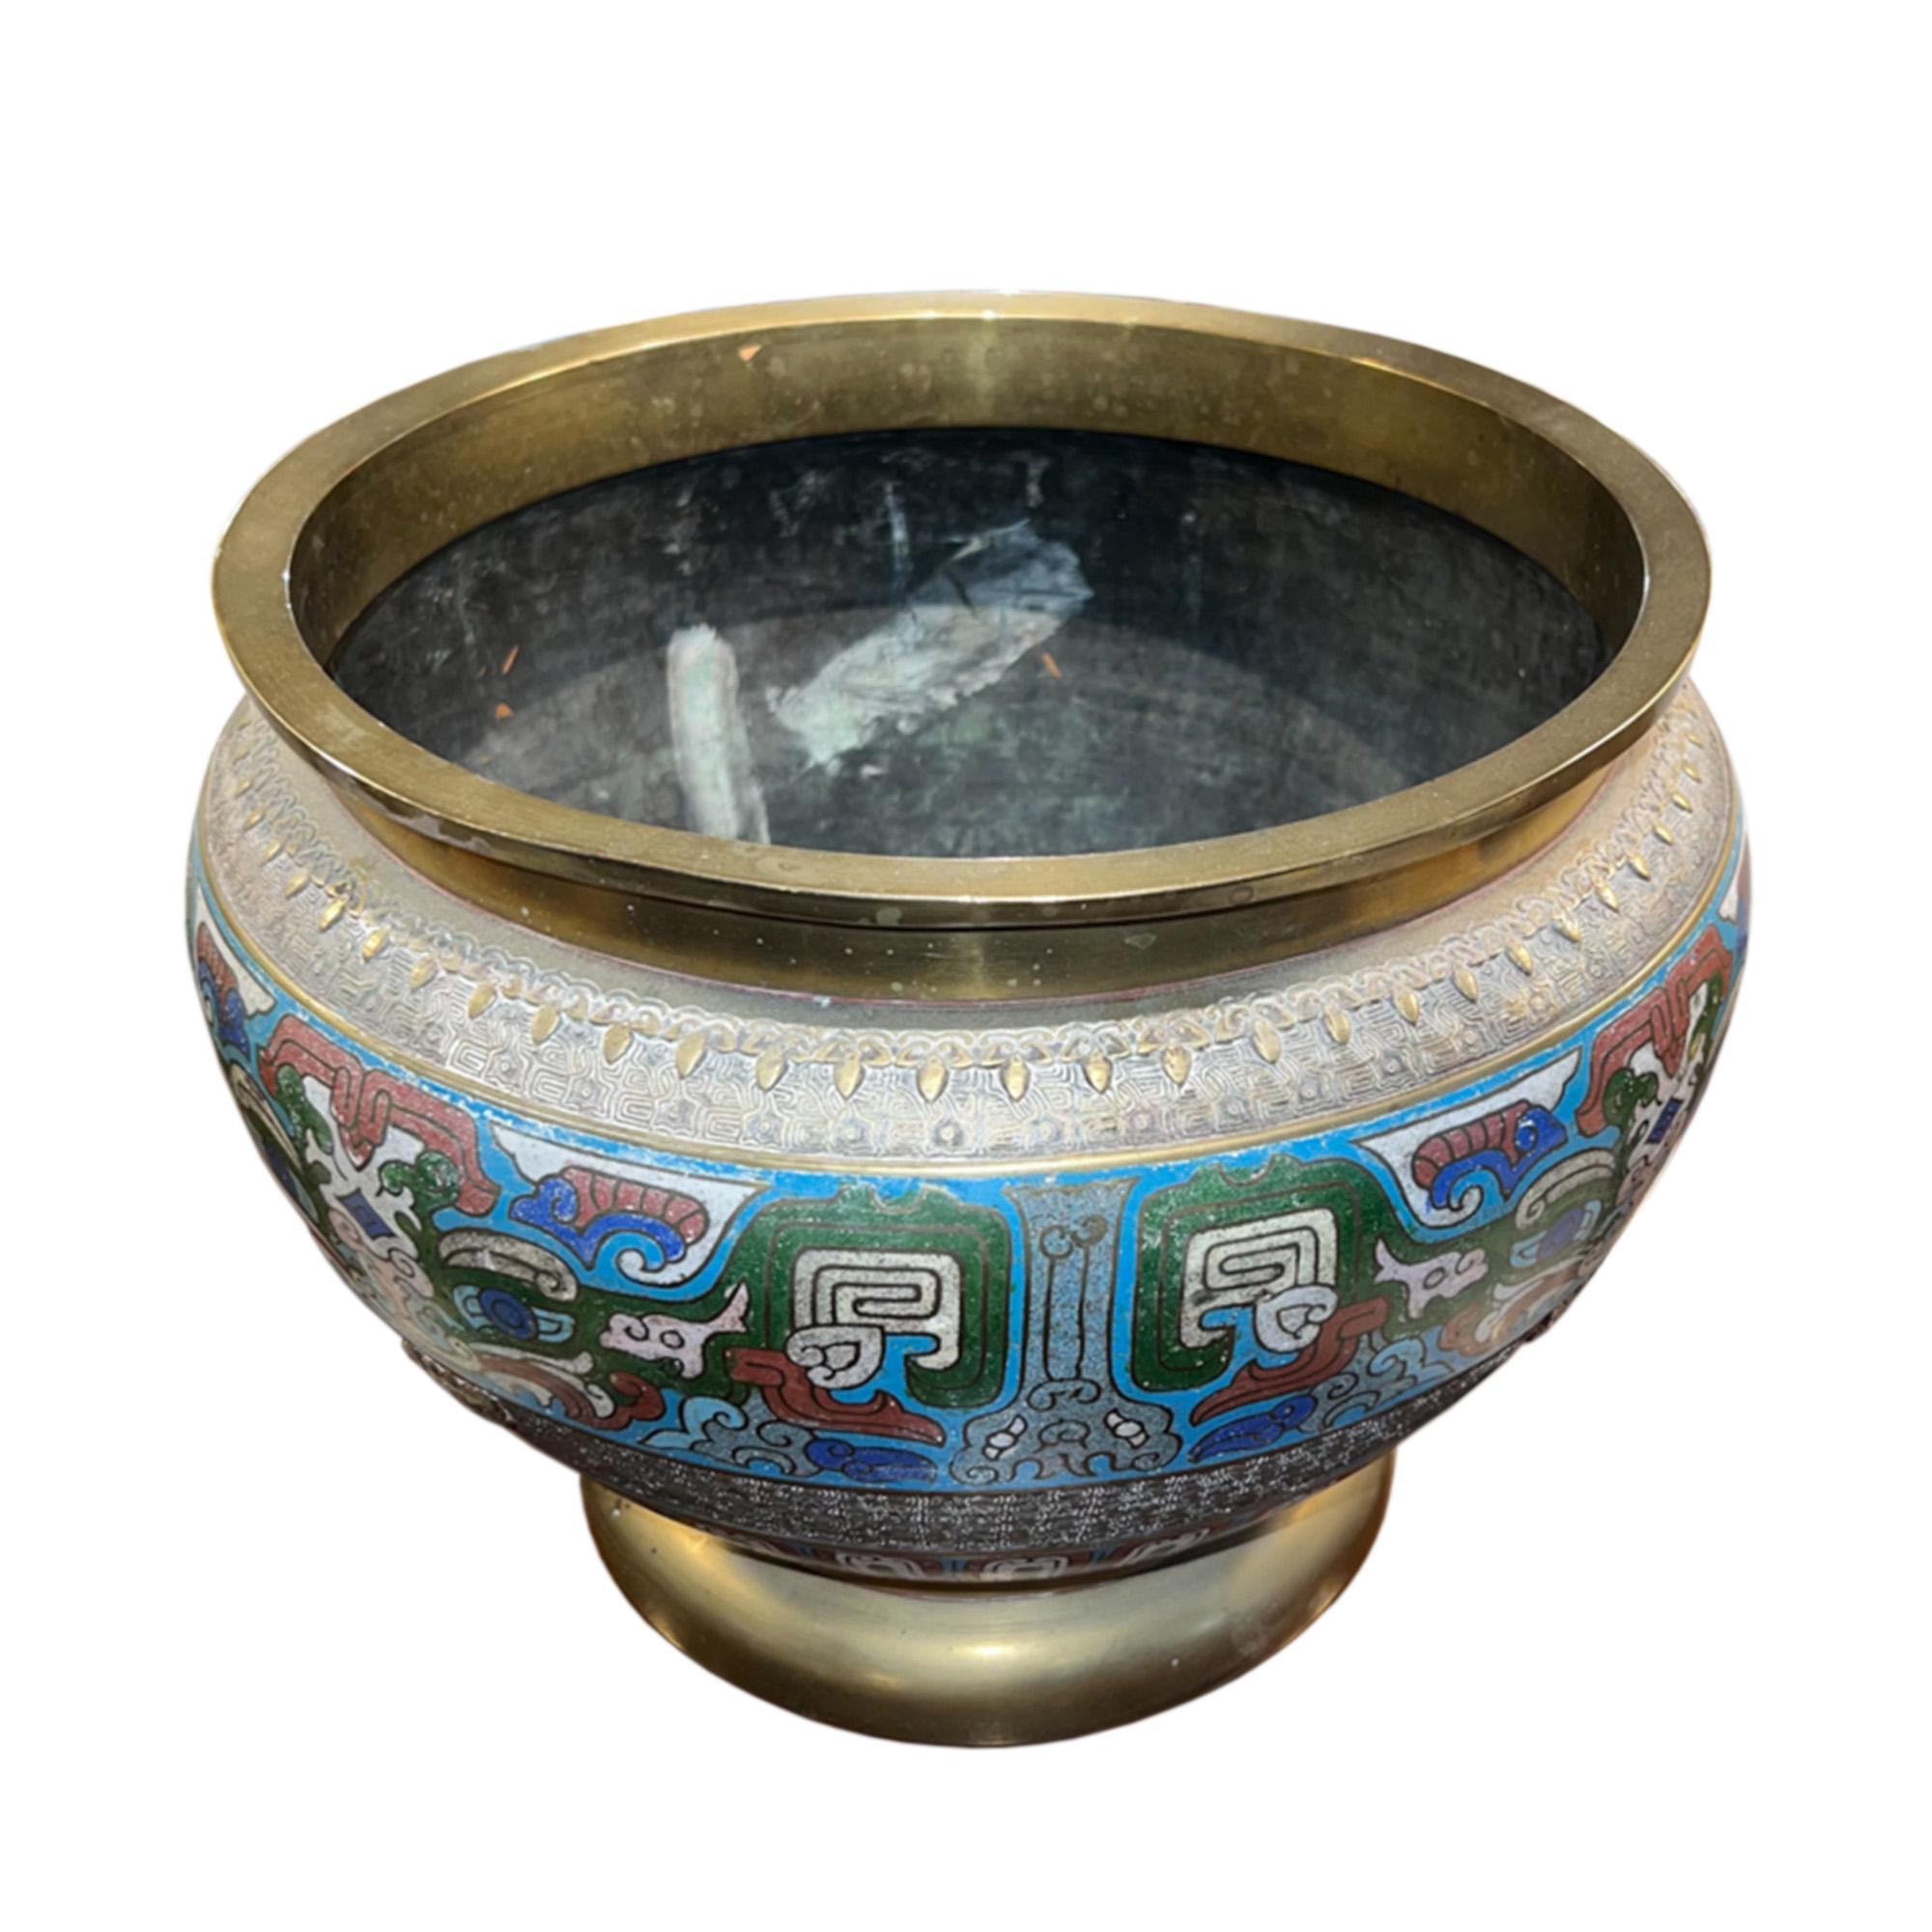 This is a very decorative jardiniere, made in Japan in the 1920s. 

We would recommend this is used for indoor plants and not placed outside - a great unique gift!

Made from enamel and brass with a lovely multi coloured design.